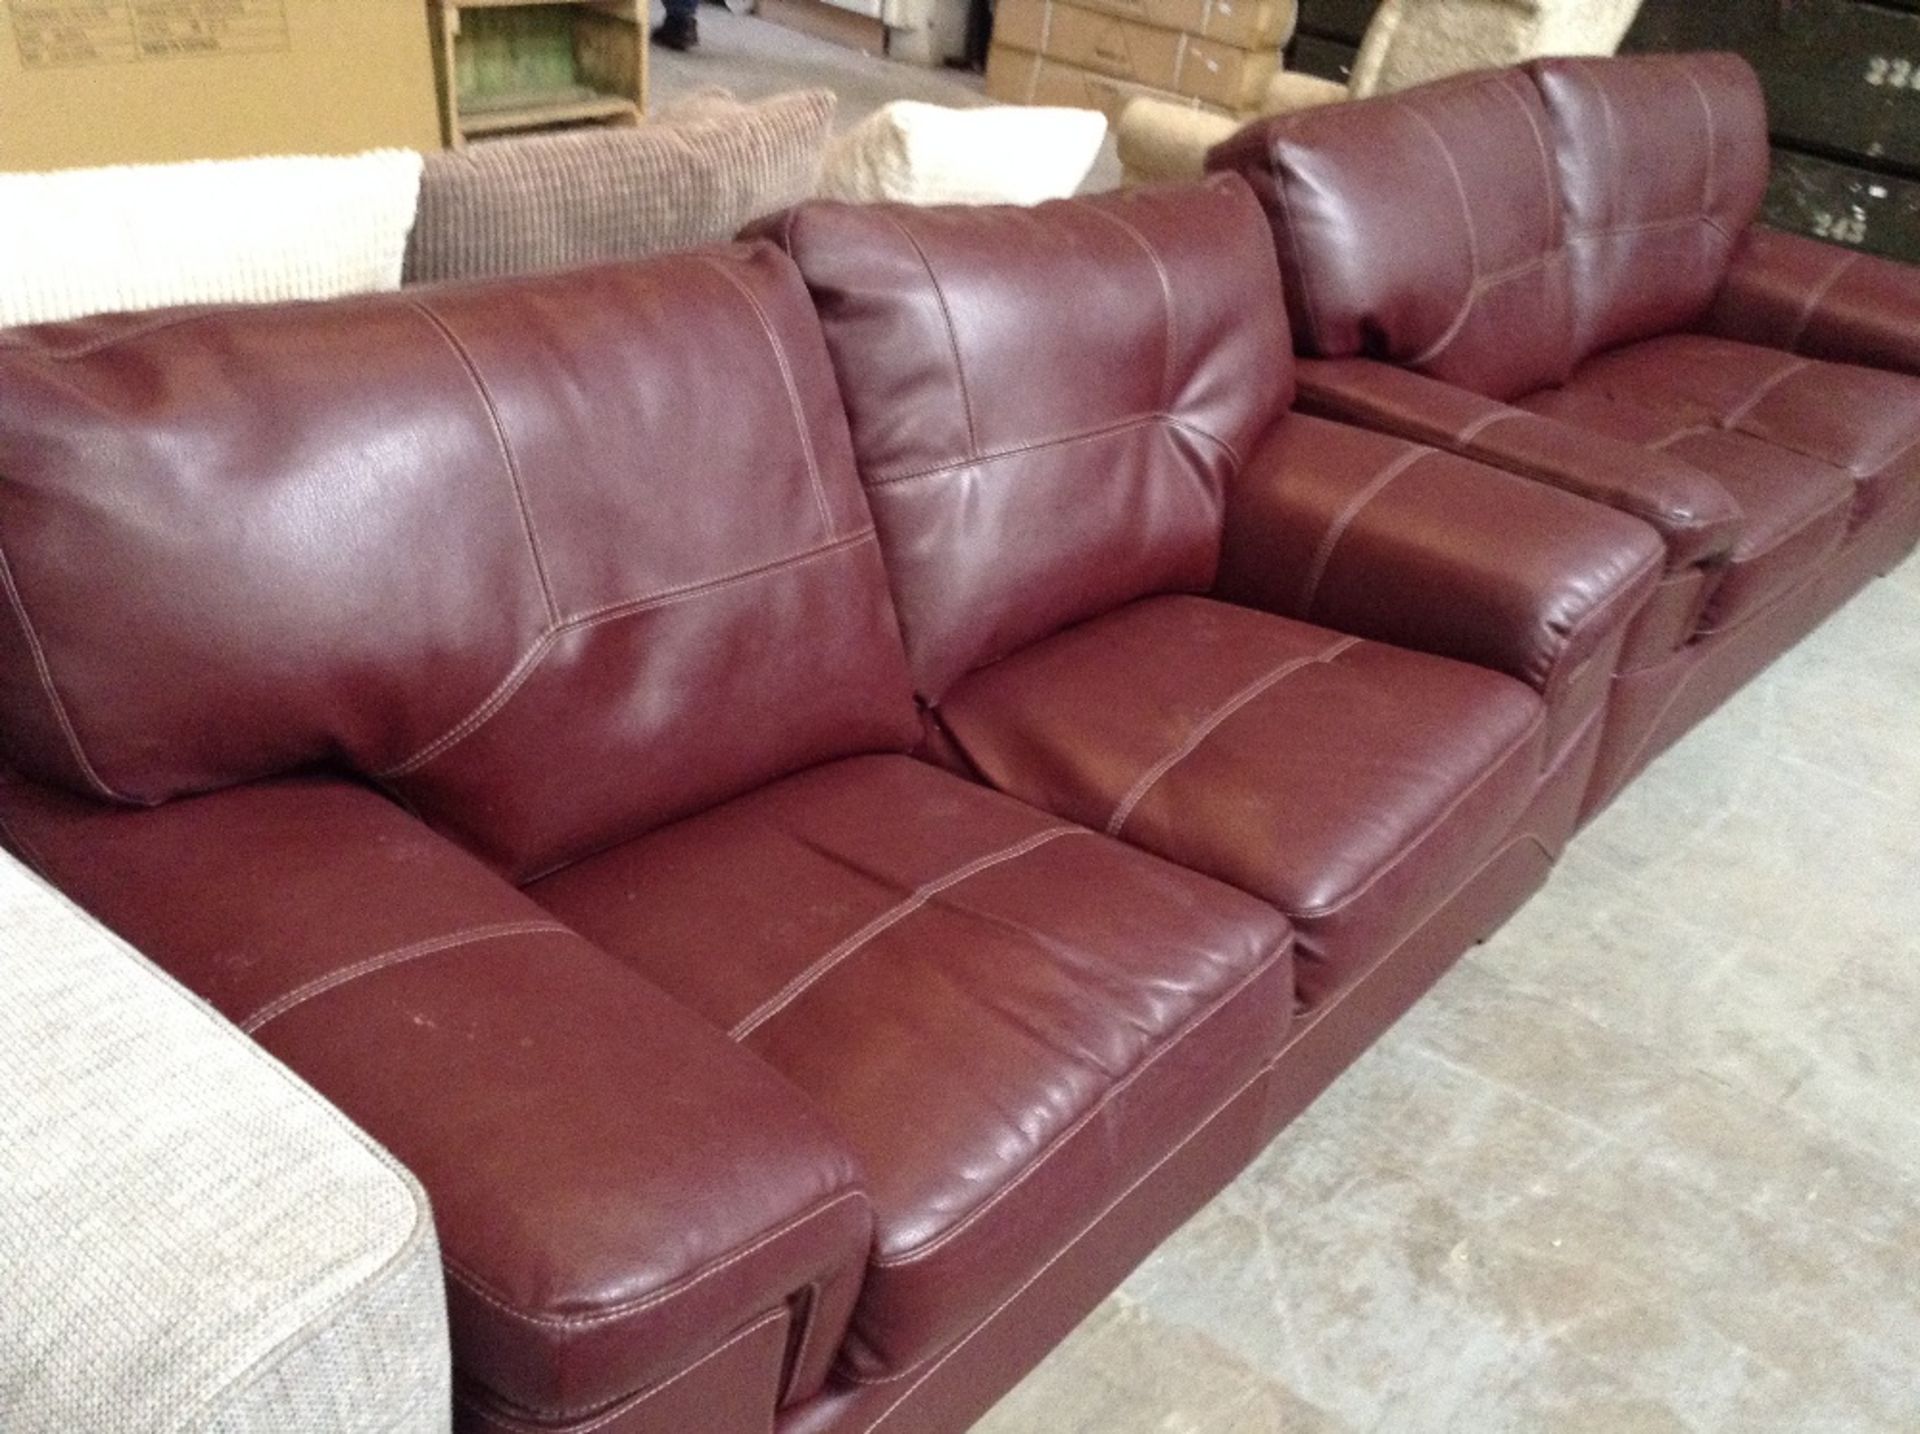 RED ENDURANCE LEATHER 2 x 2 SEATER SOFAS (leather